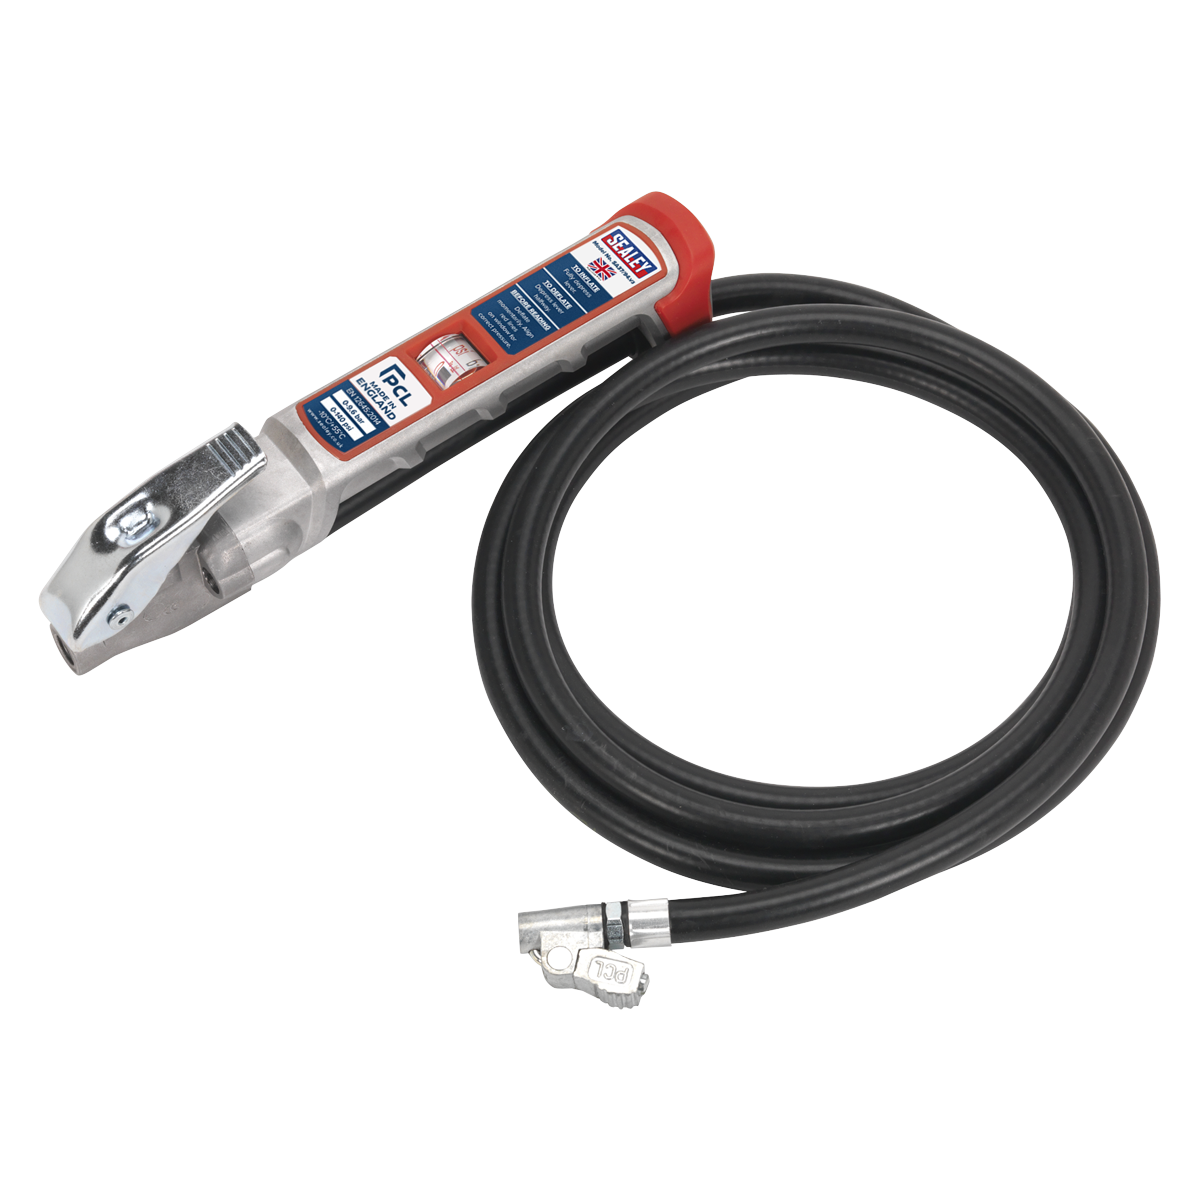 Professional Tyre Inflator with 2.5m Hose & Clip-On Connector - SA37/94 - Farming Parts